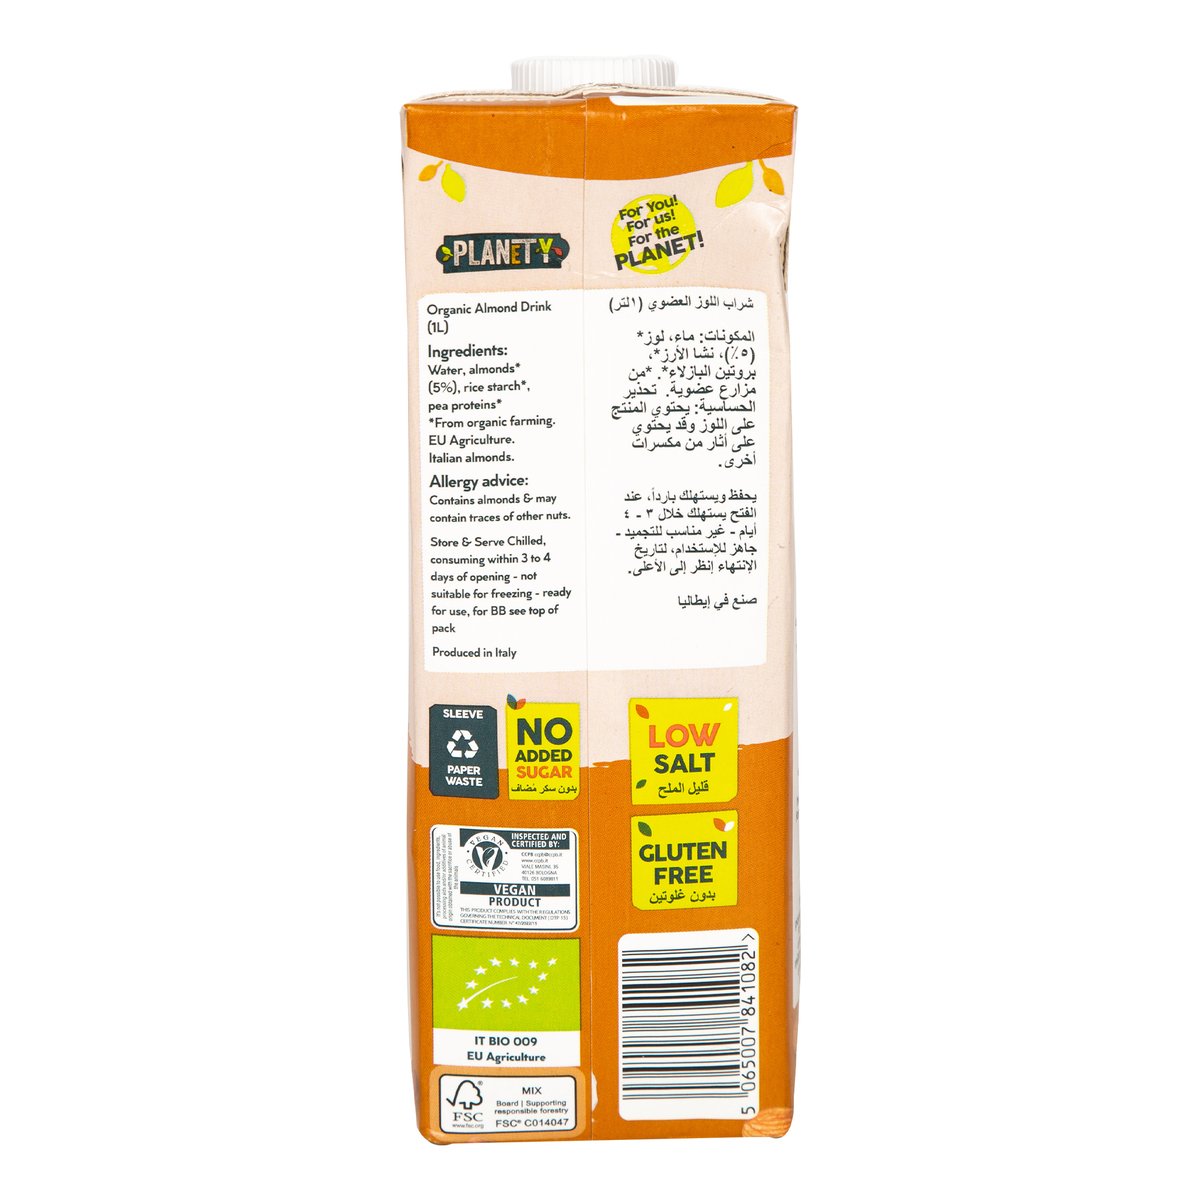 PlanetY Organic Almond Dairy Free Drink 1 Litre